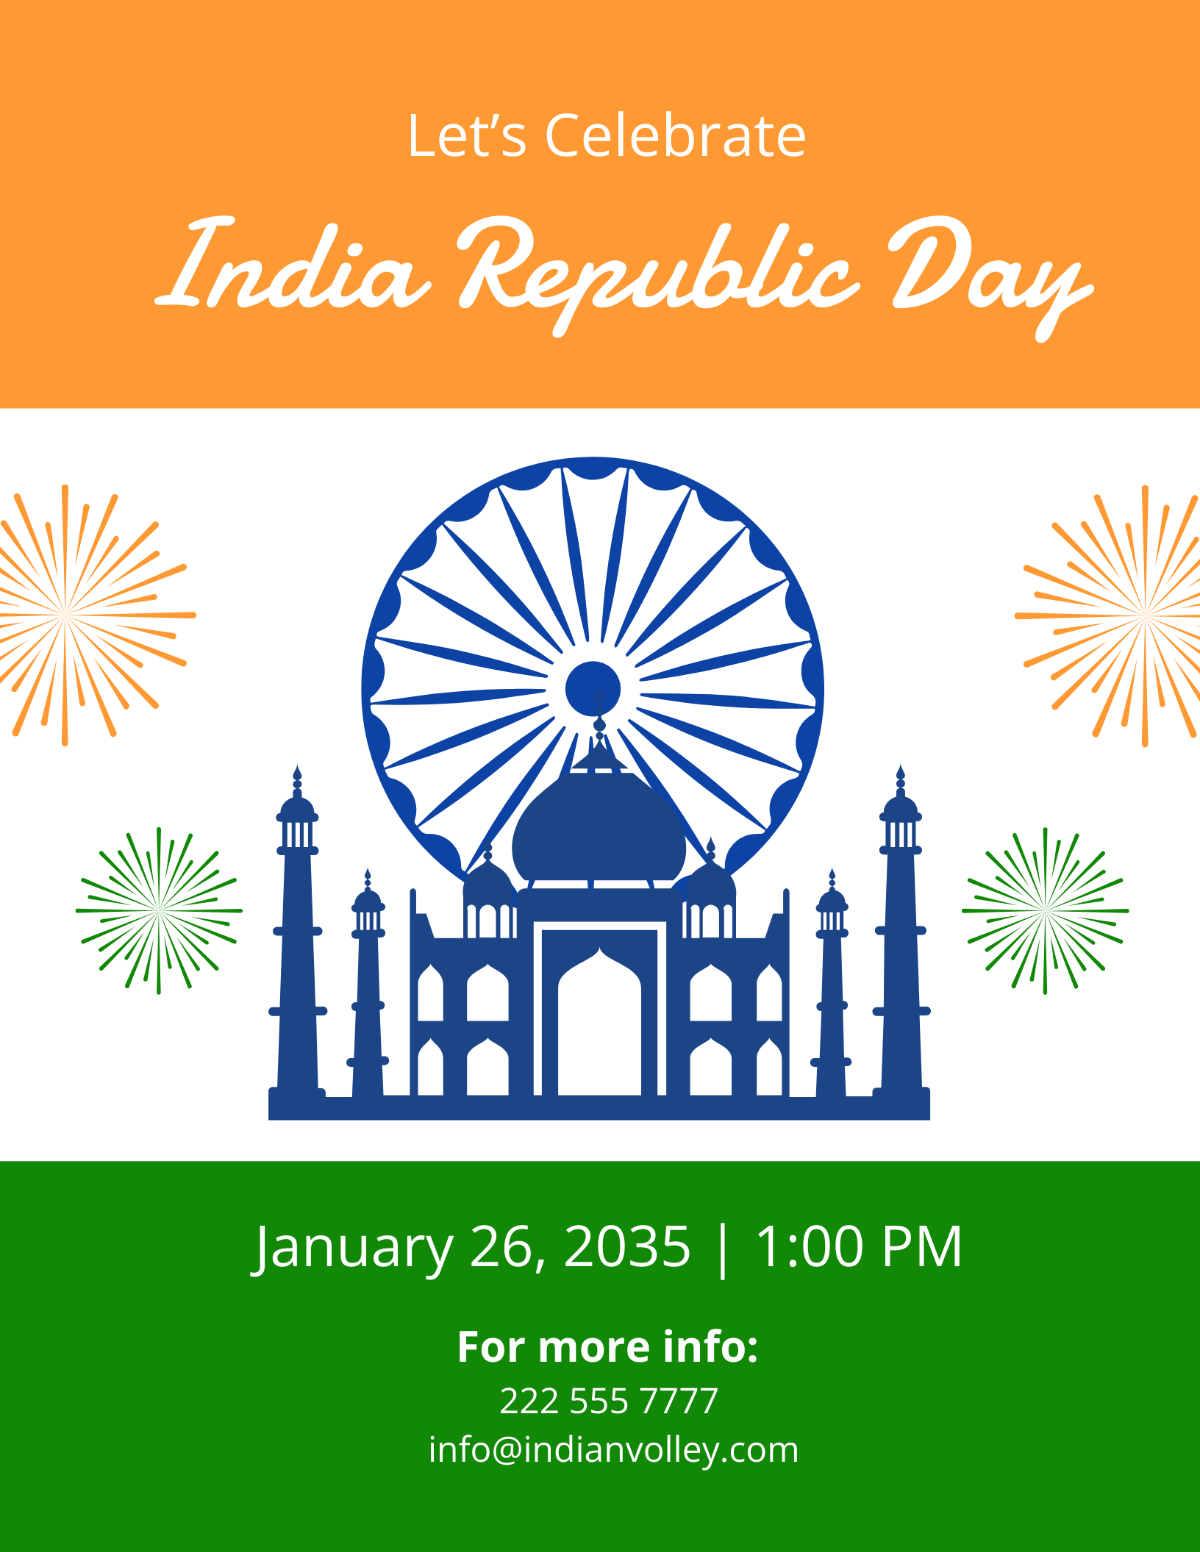 India Republic Day Event Flyer